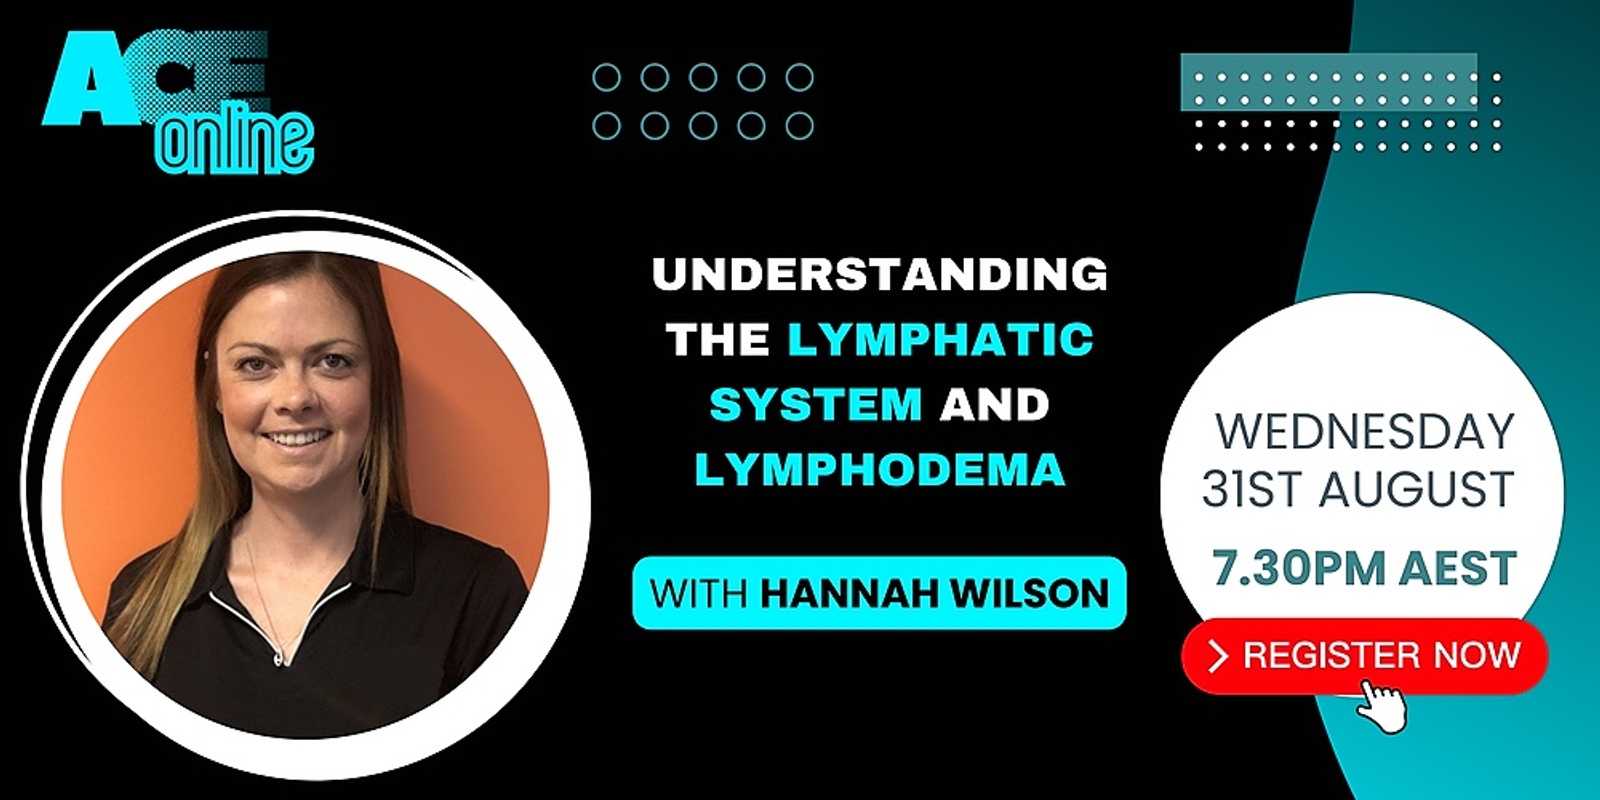 Understanding the Lymphatic system and Lymphoedema with Hannah Wilson